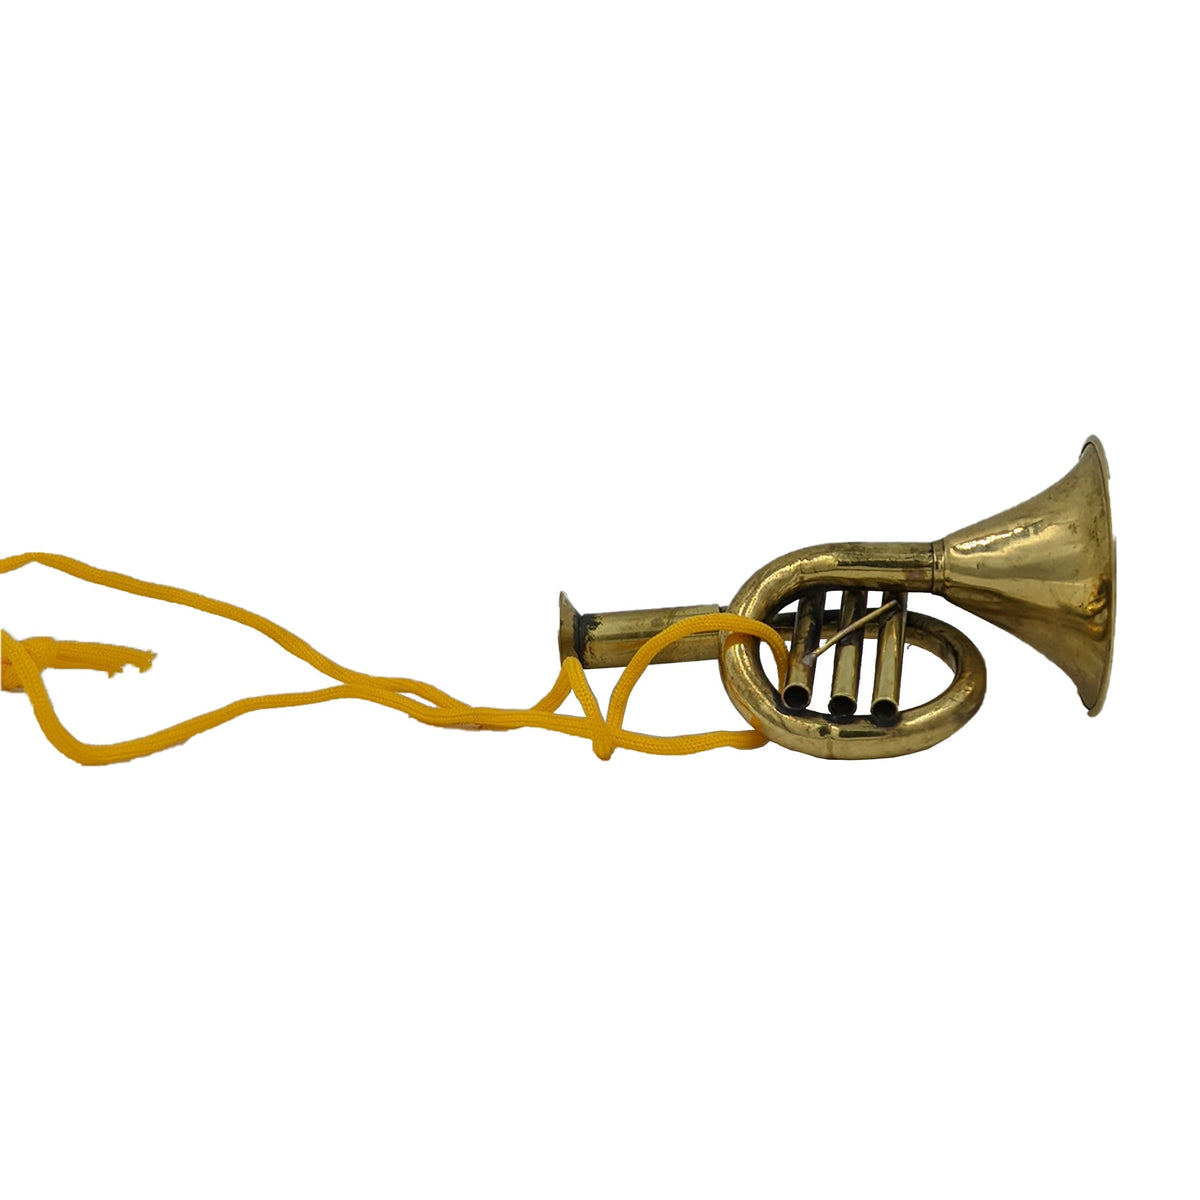 Handcrafted Metal Musical Trumpet Instruments